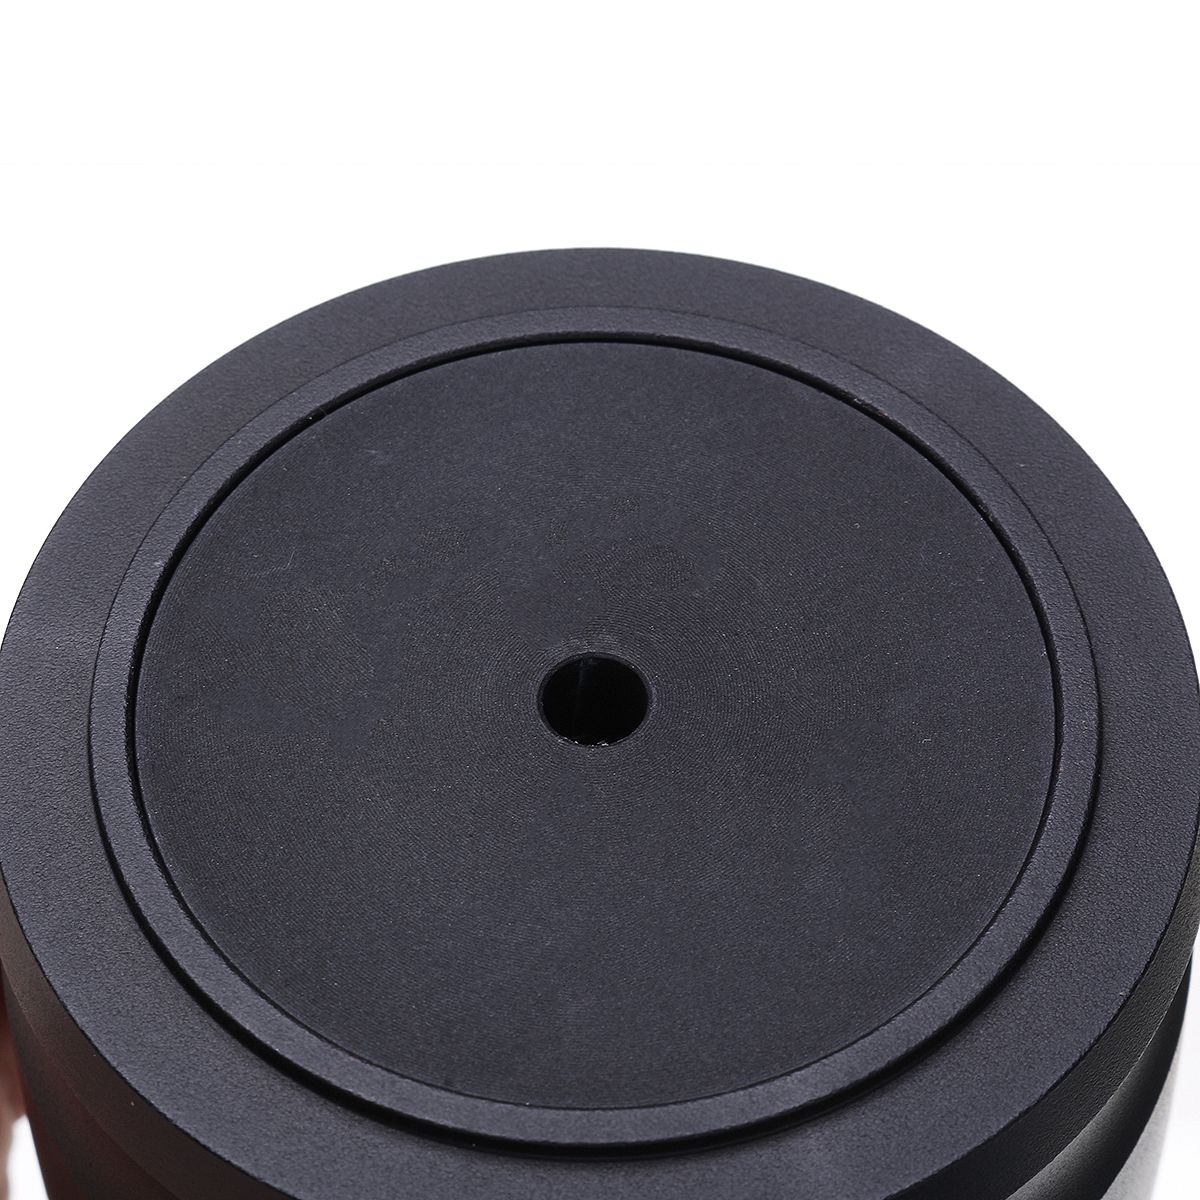 Aluminum-Dosing-Ring-for-Brewing-Bowl-Coffee-Powder-Accessories-for-58MM-Coffee-Tamper-Cup-1468128